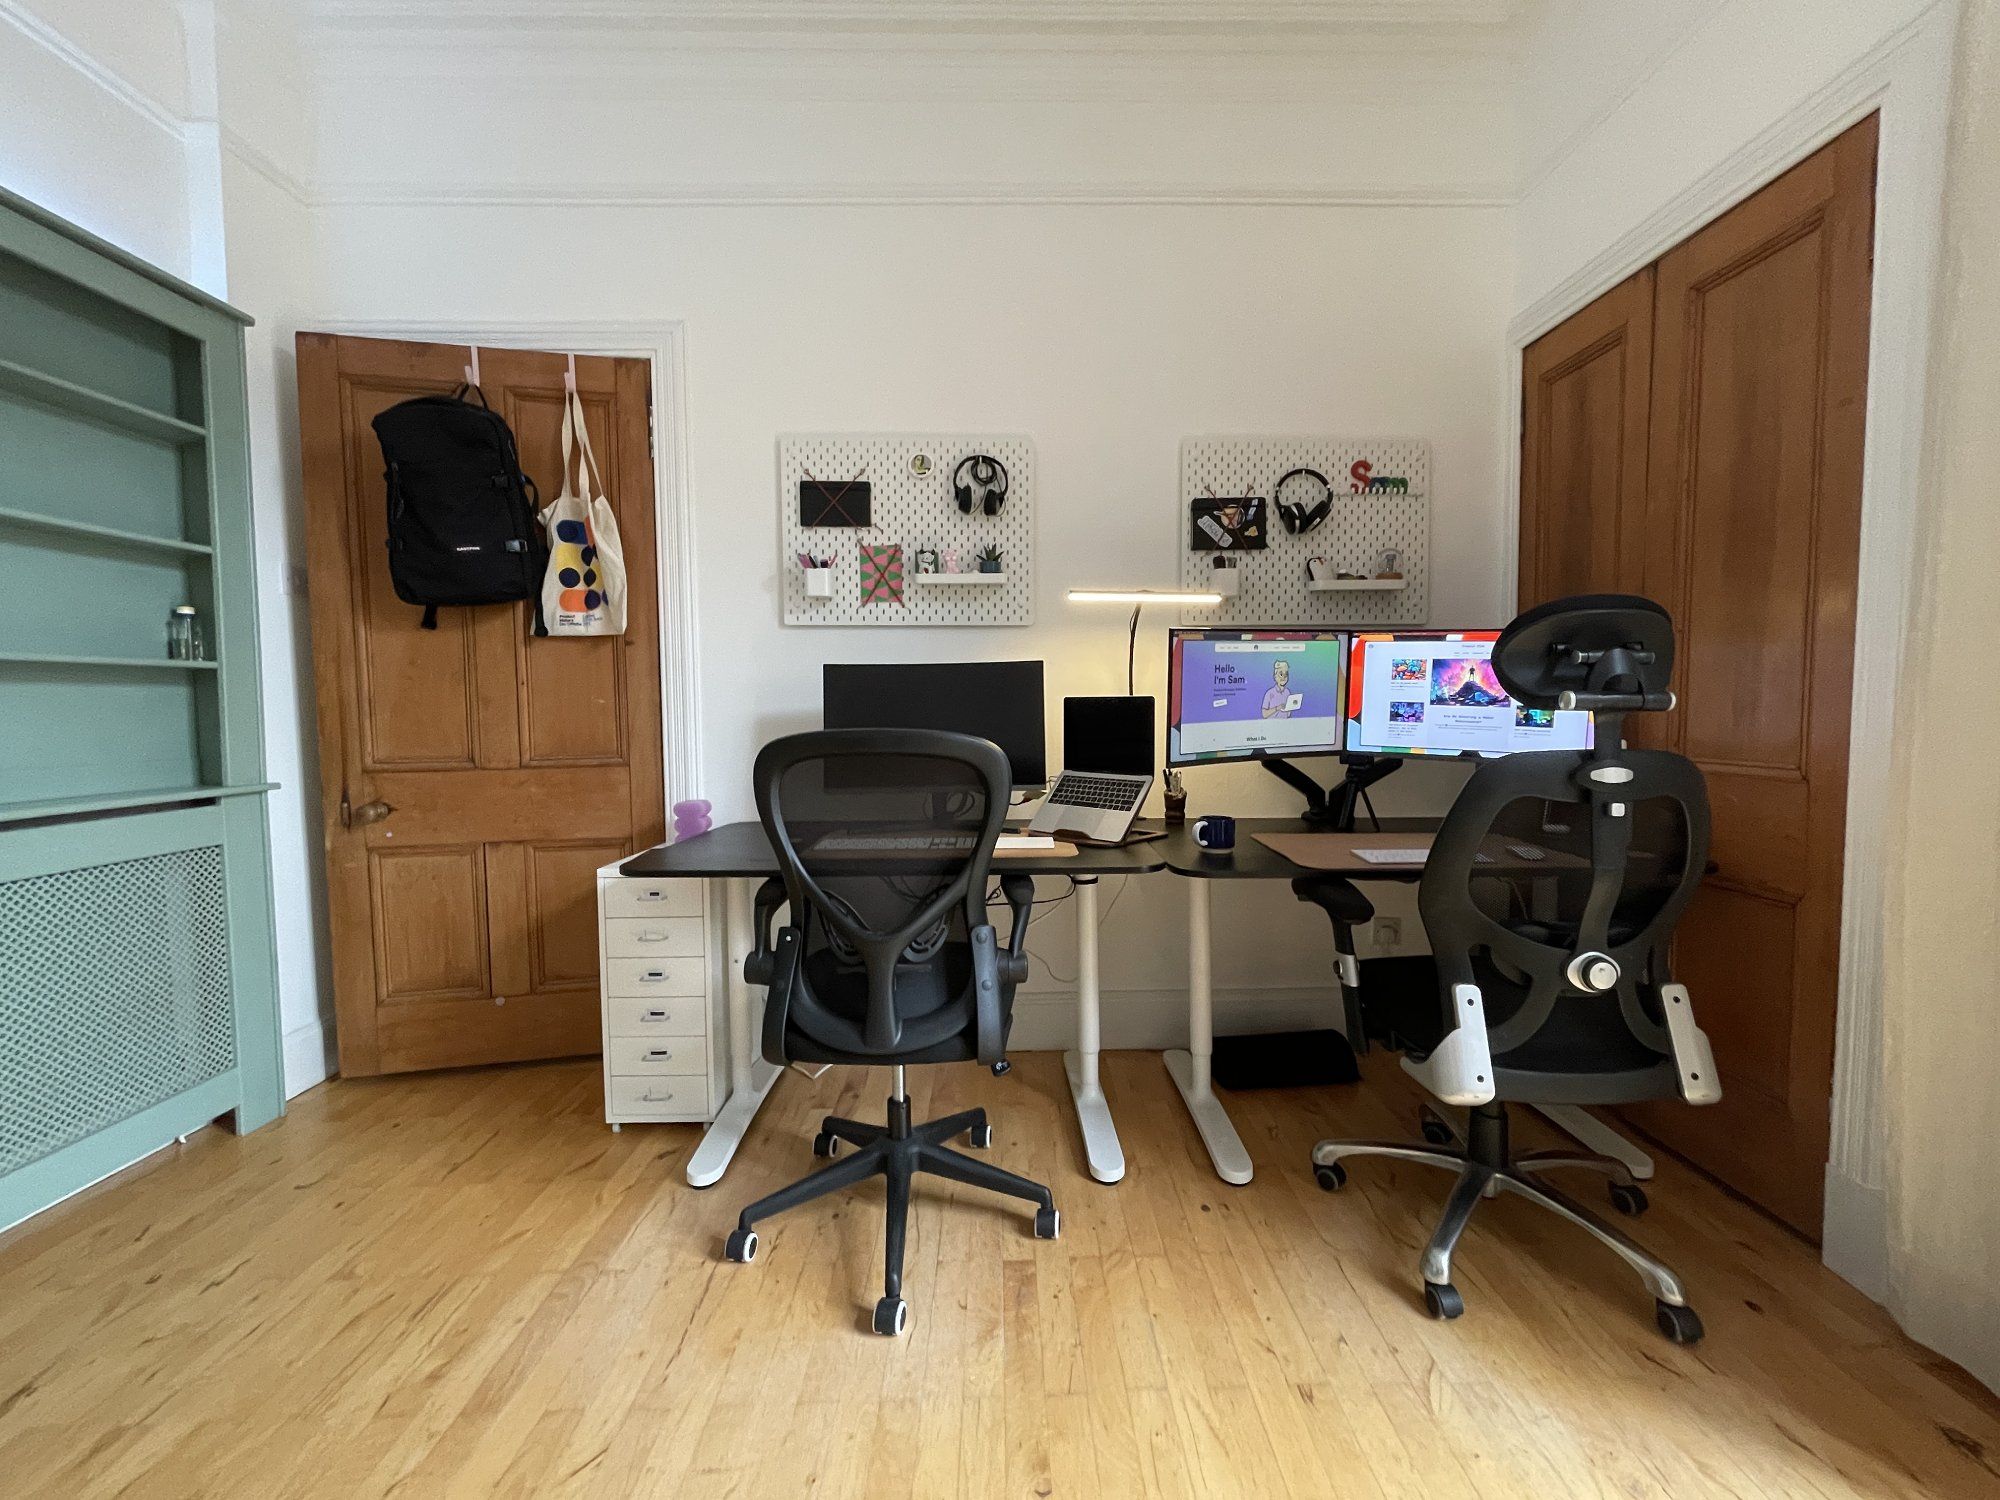 A shared home office for two people